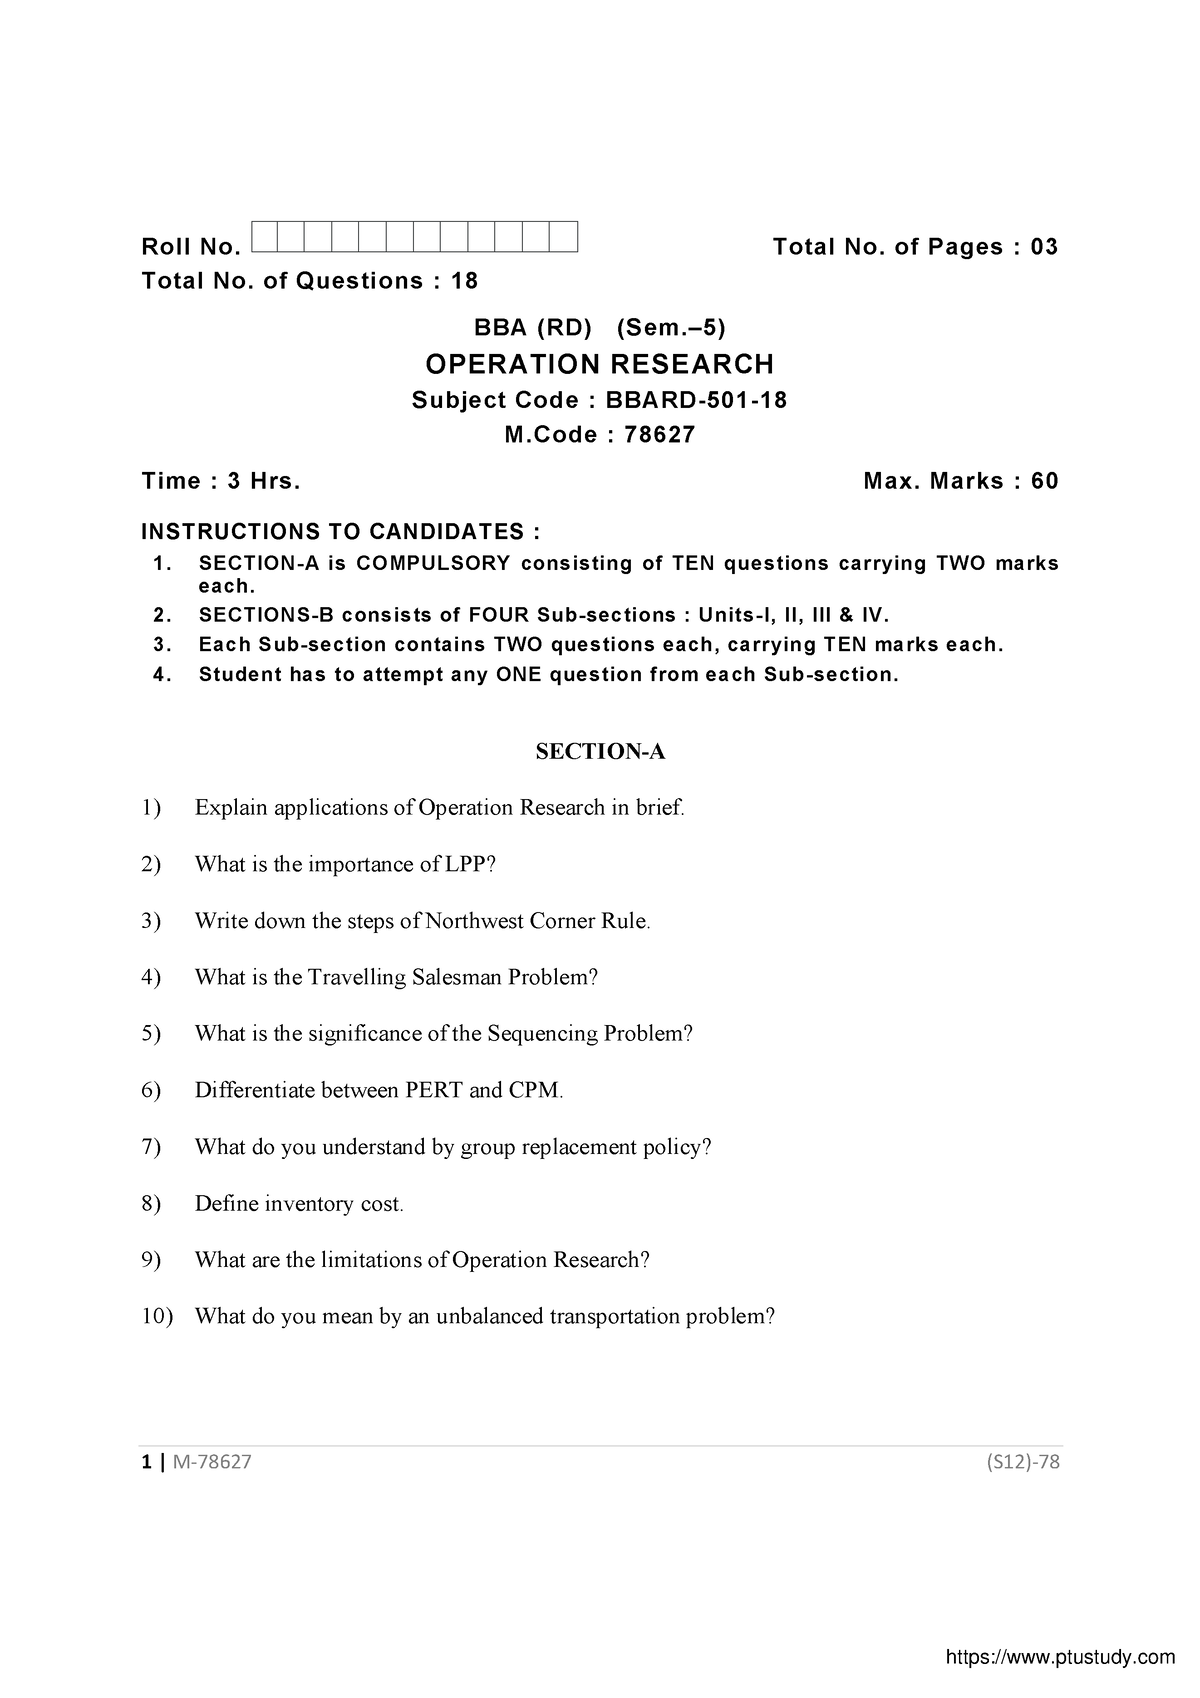 operation research question paper bba